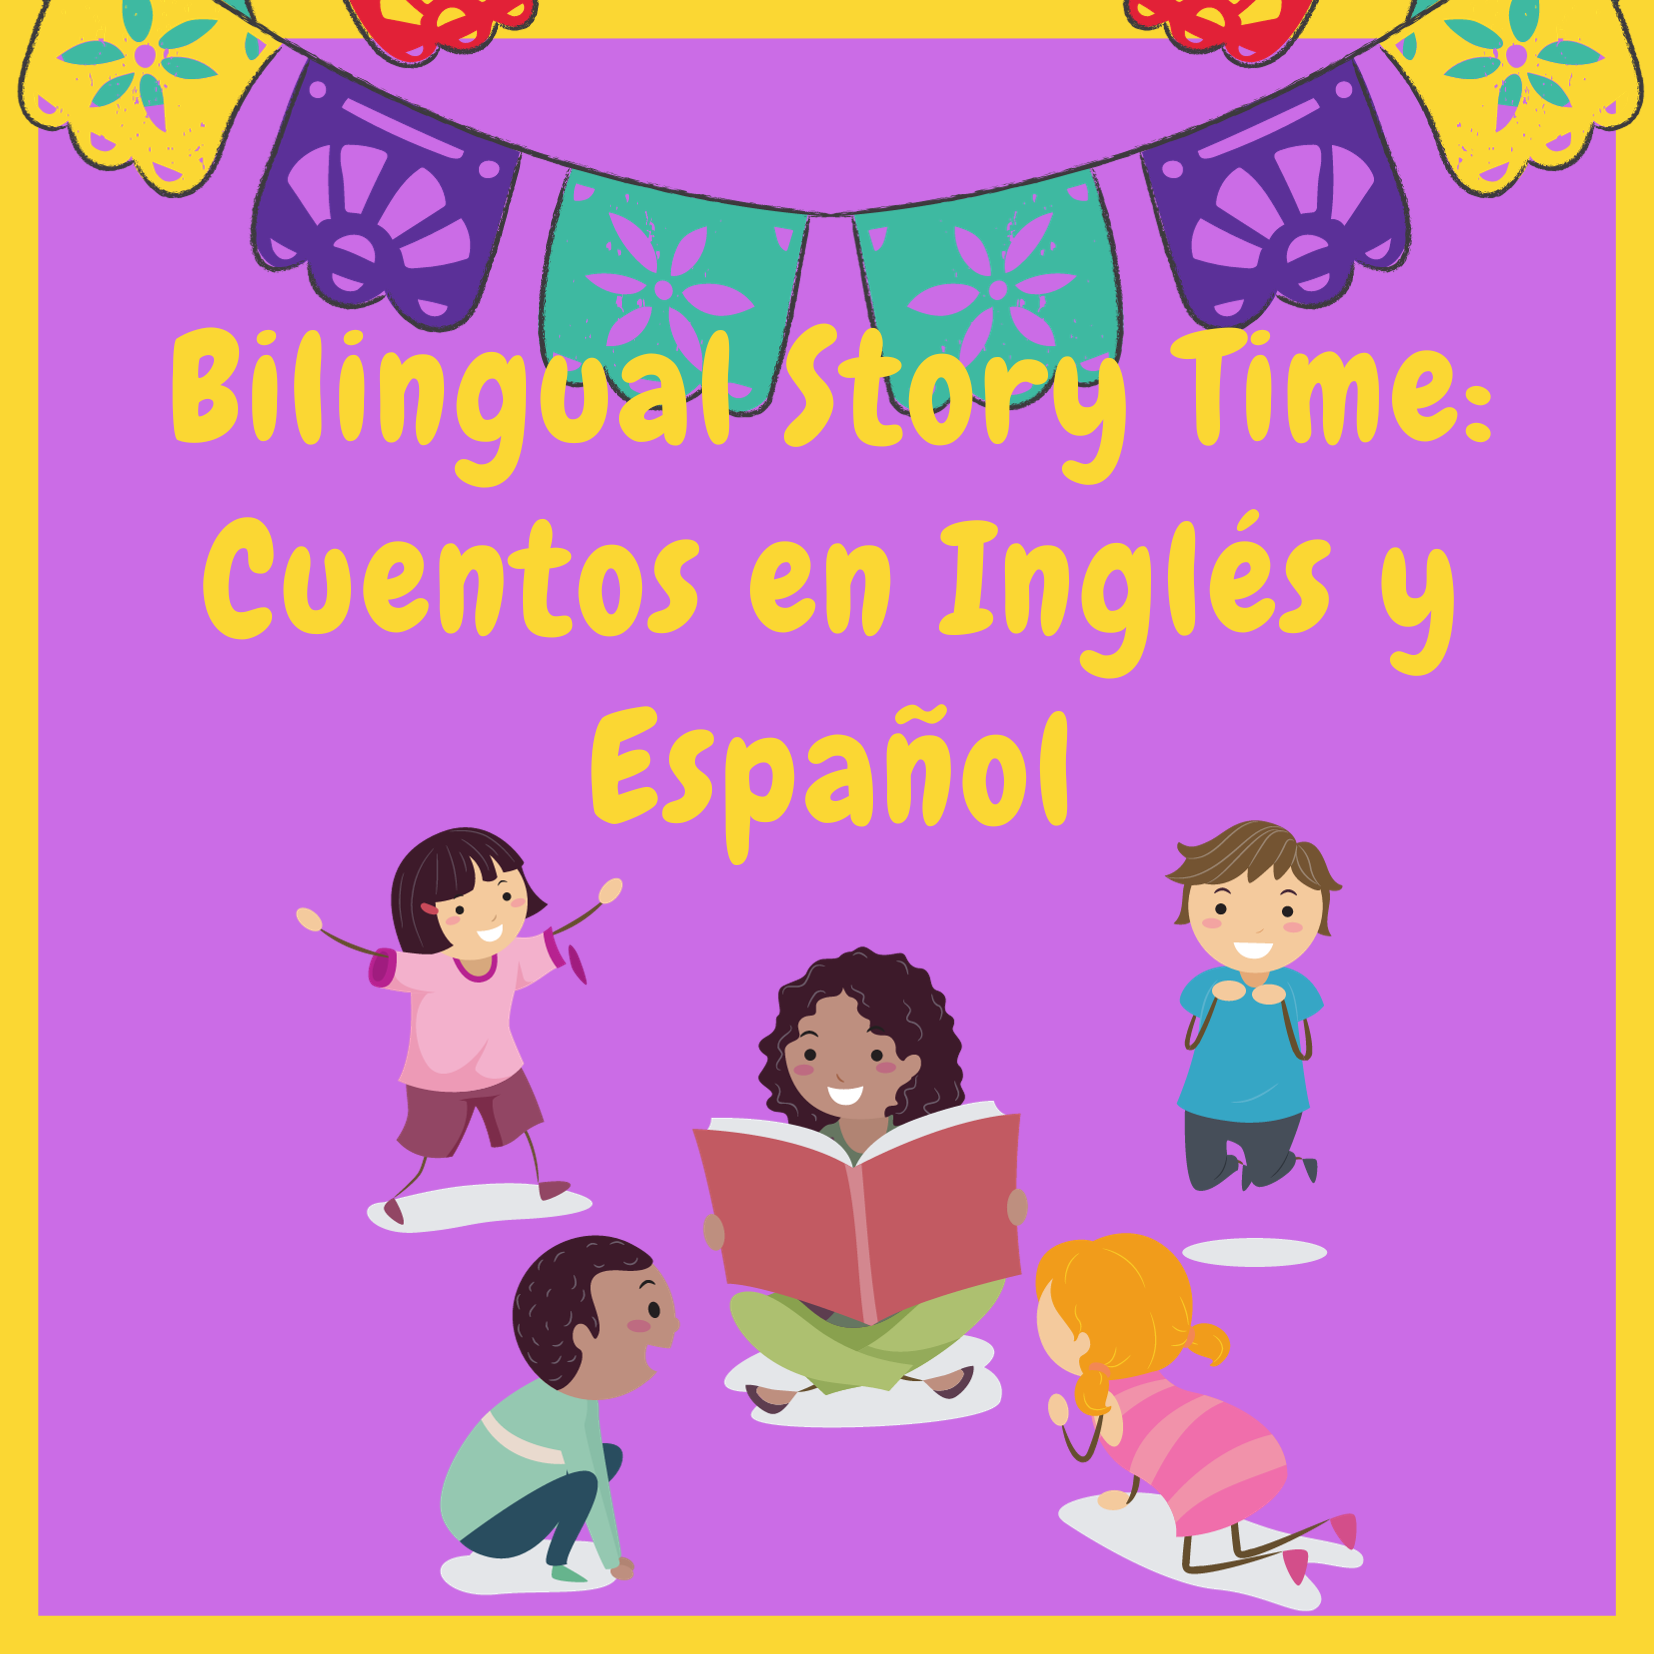 purple background with a colorful banner on top, kids sitting around an adult reading. Text in blue and yellow says bilingual story time cuentos en ingles y espanol